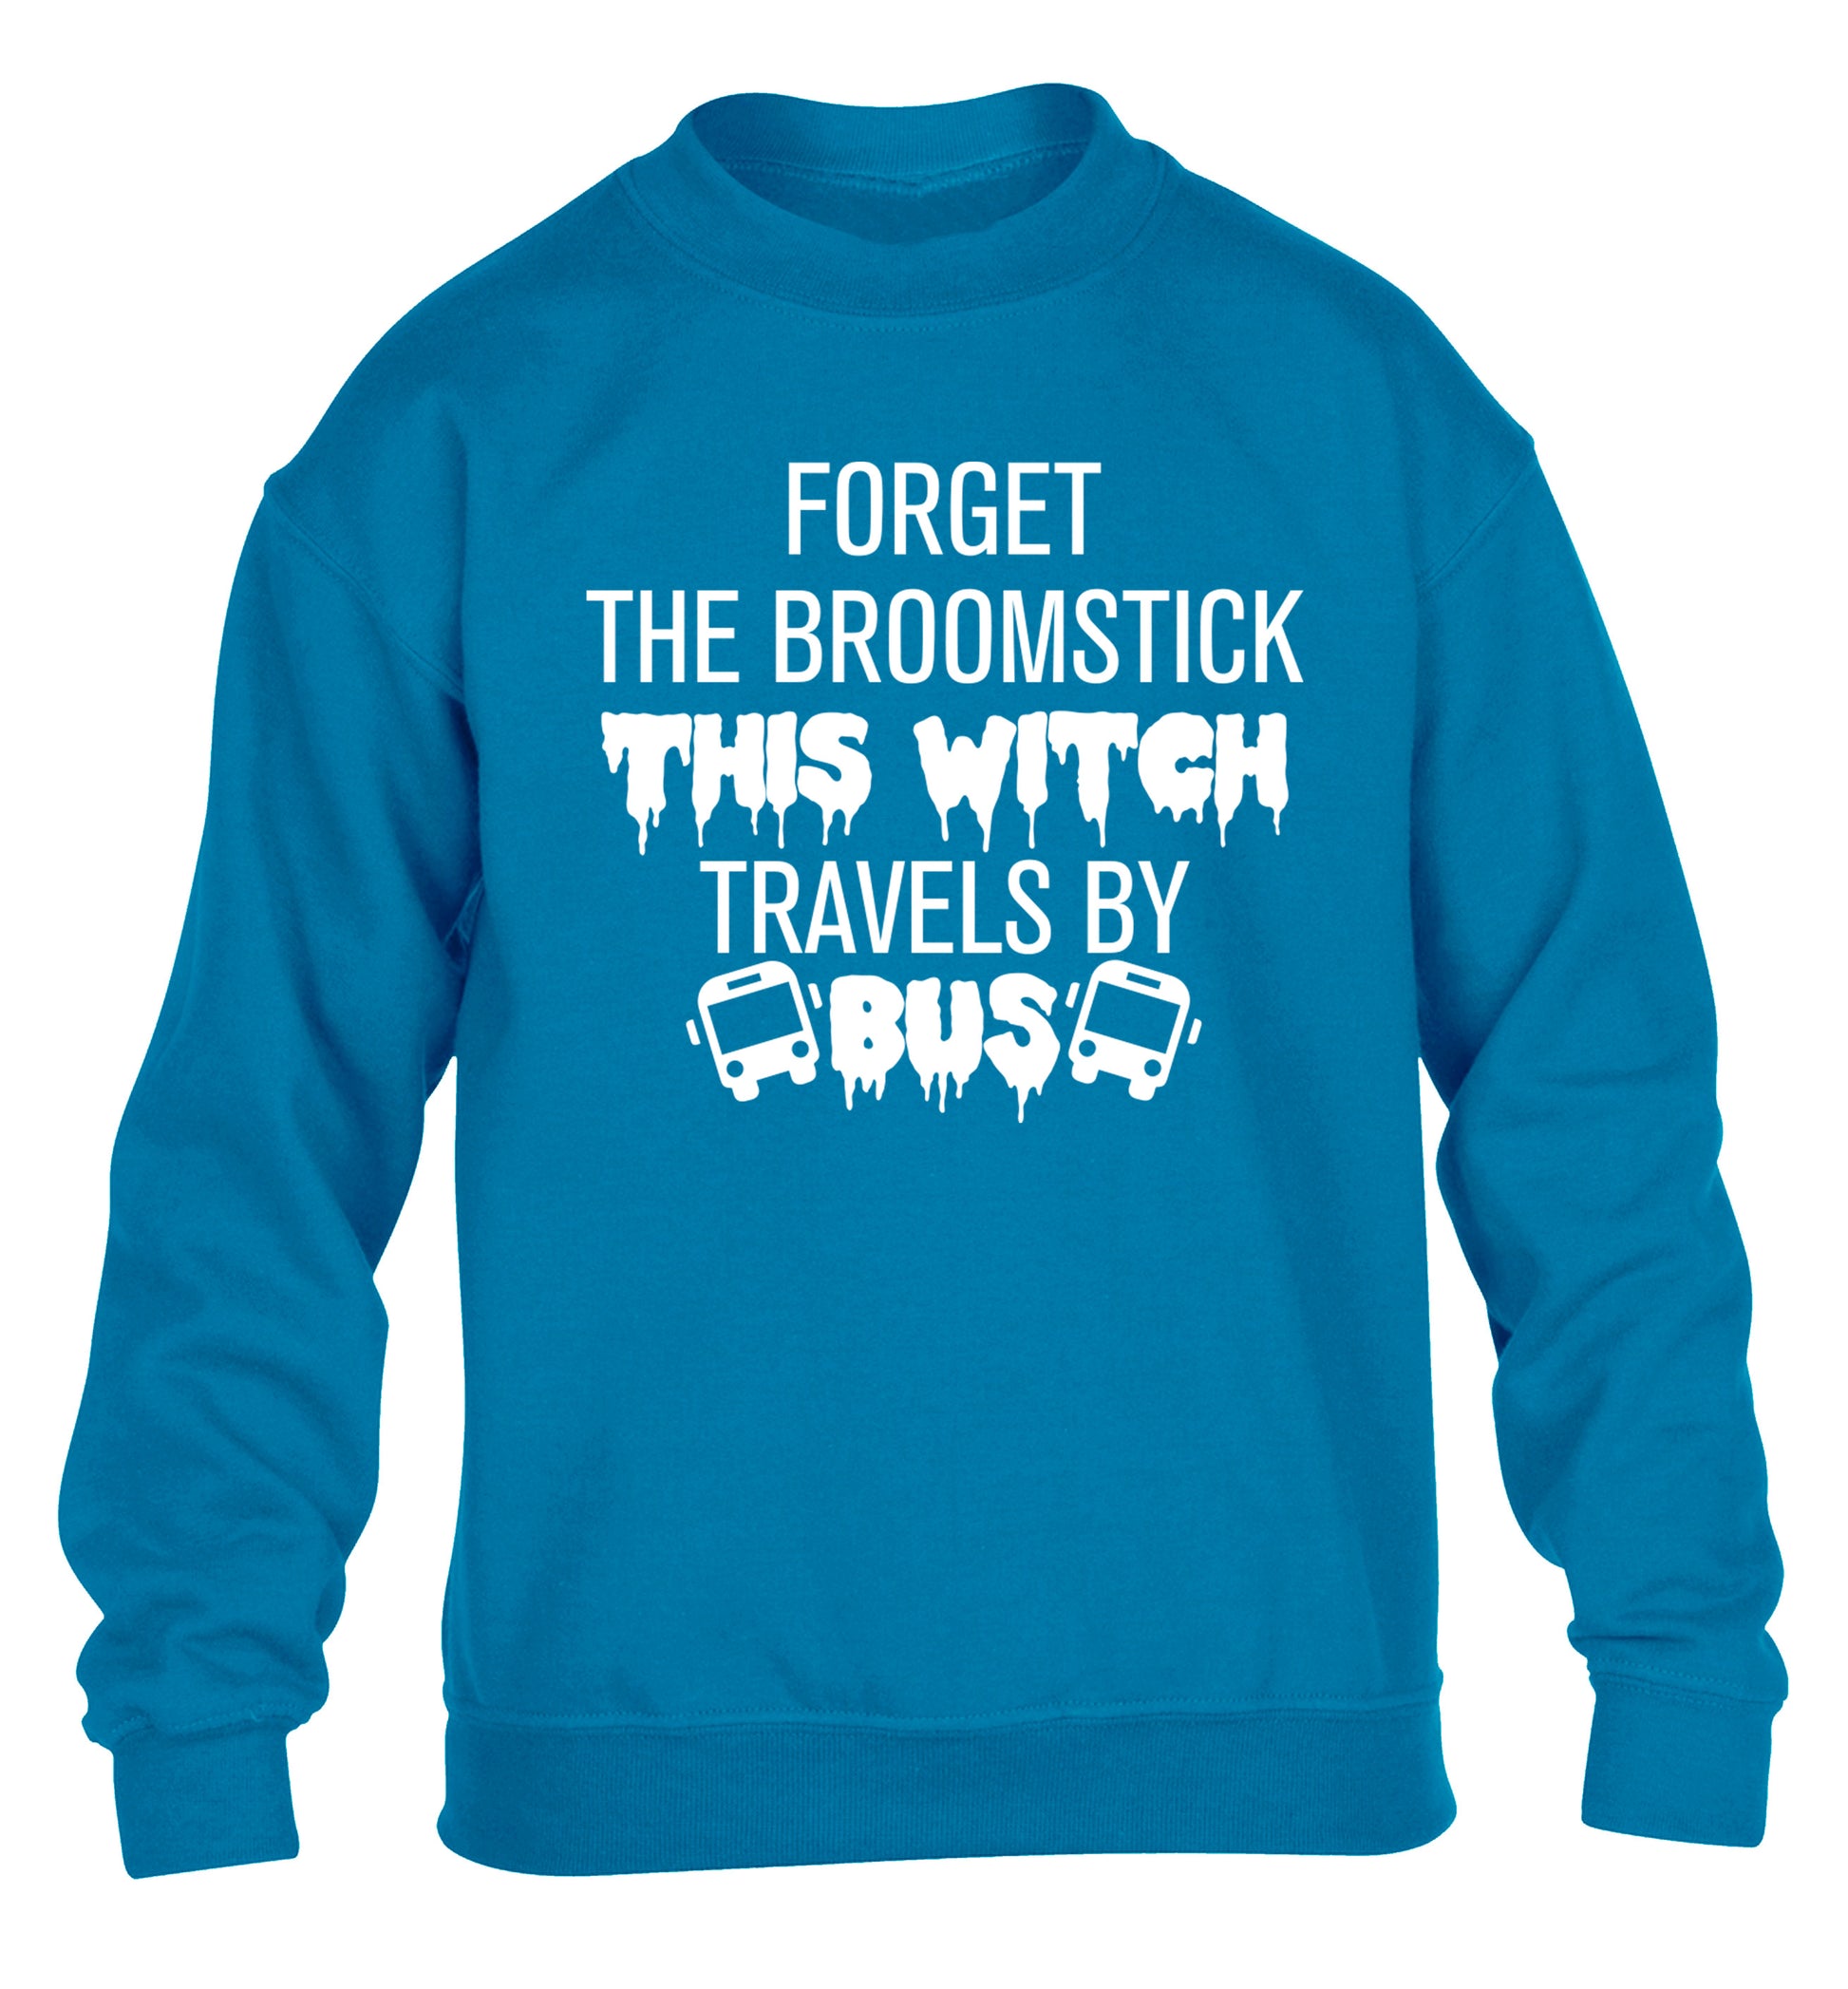 Forget the broomstick this witch travels by bus children's blue sweater 12-14 Years